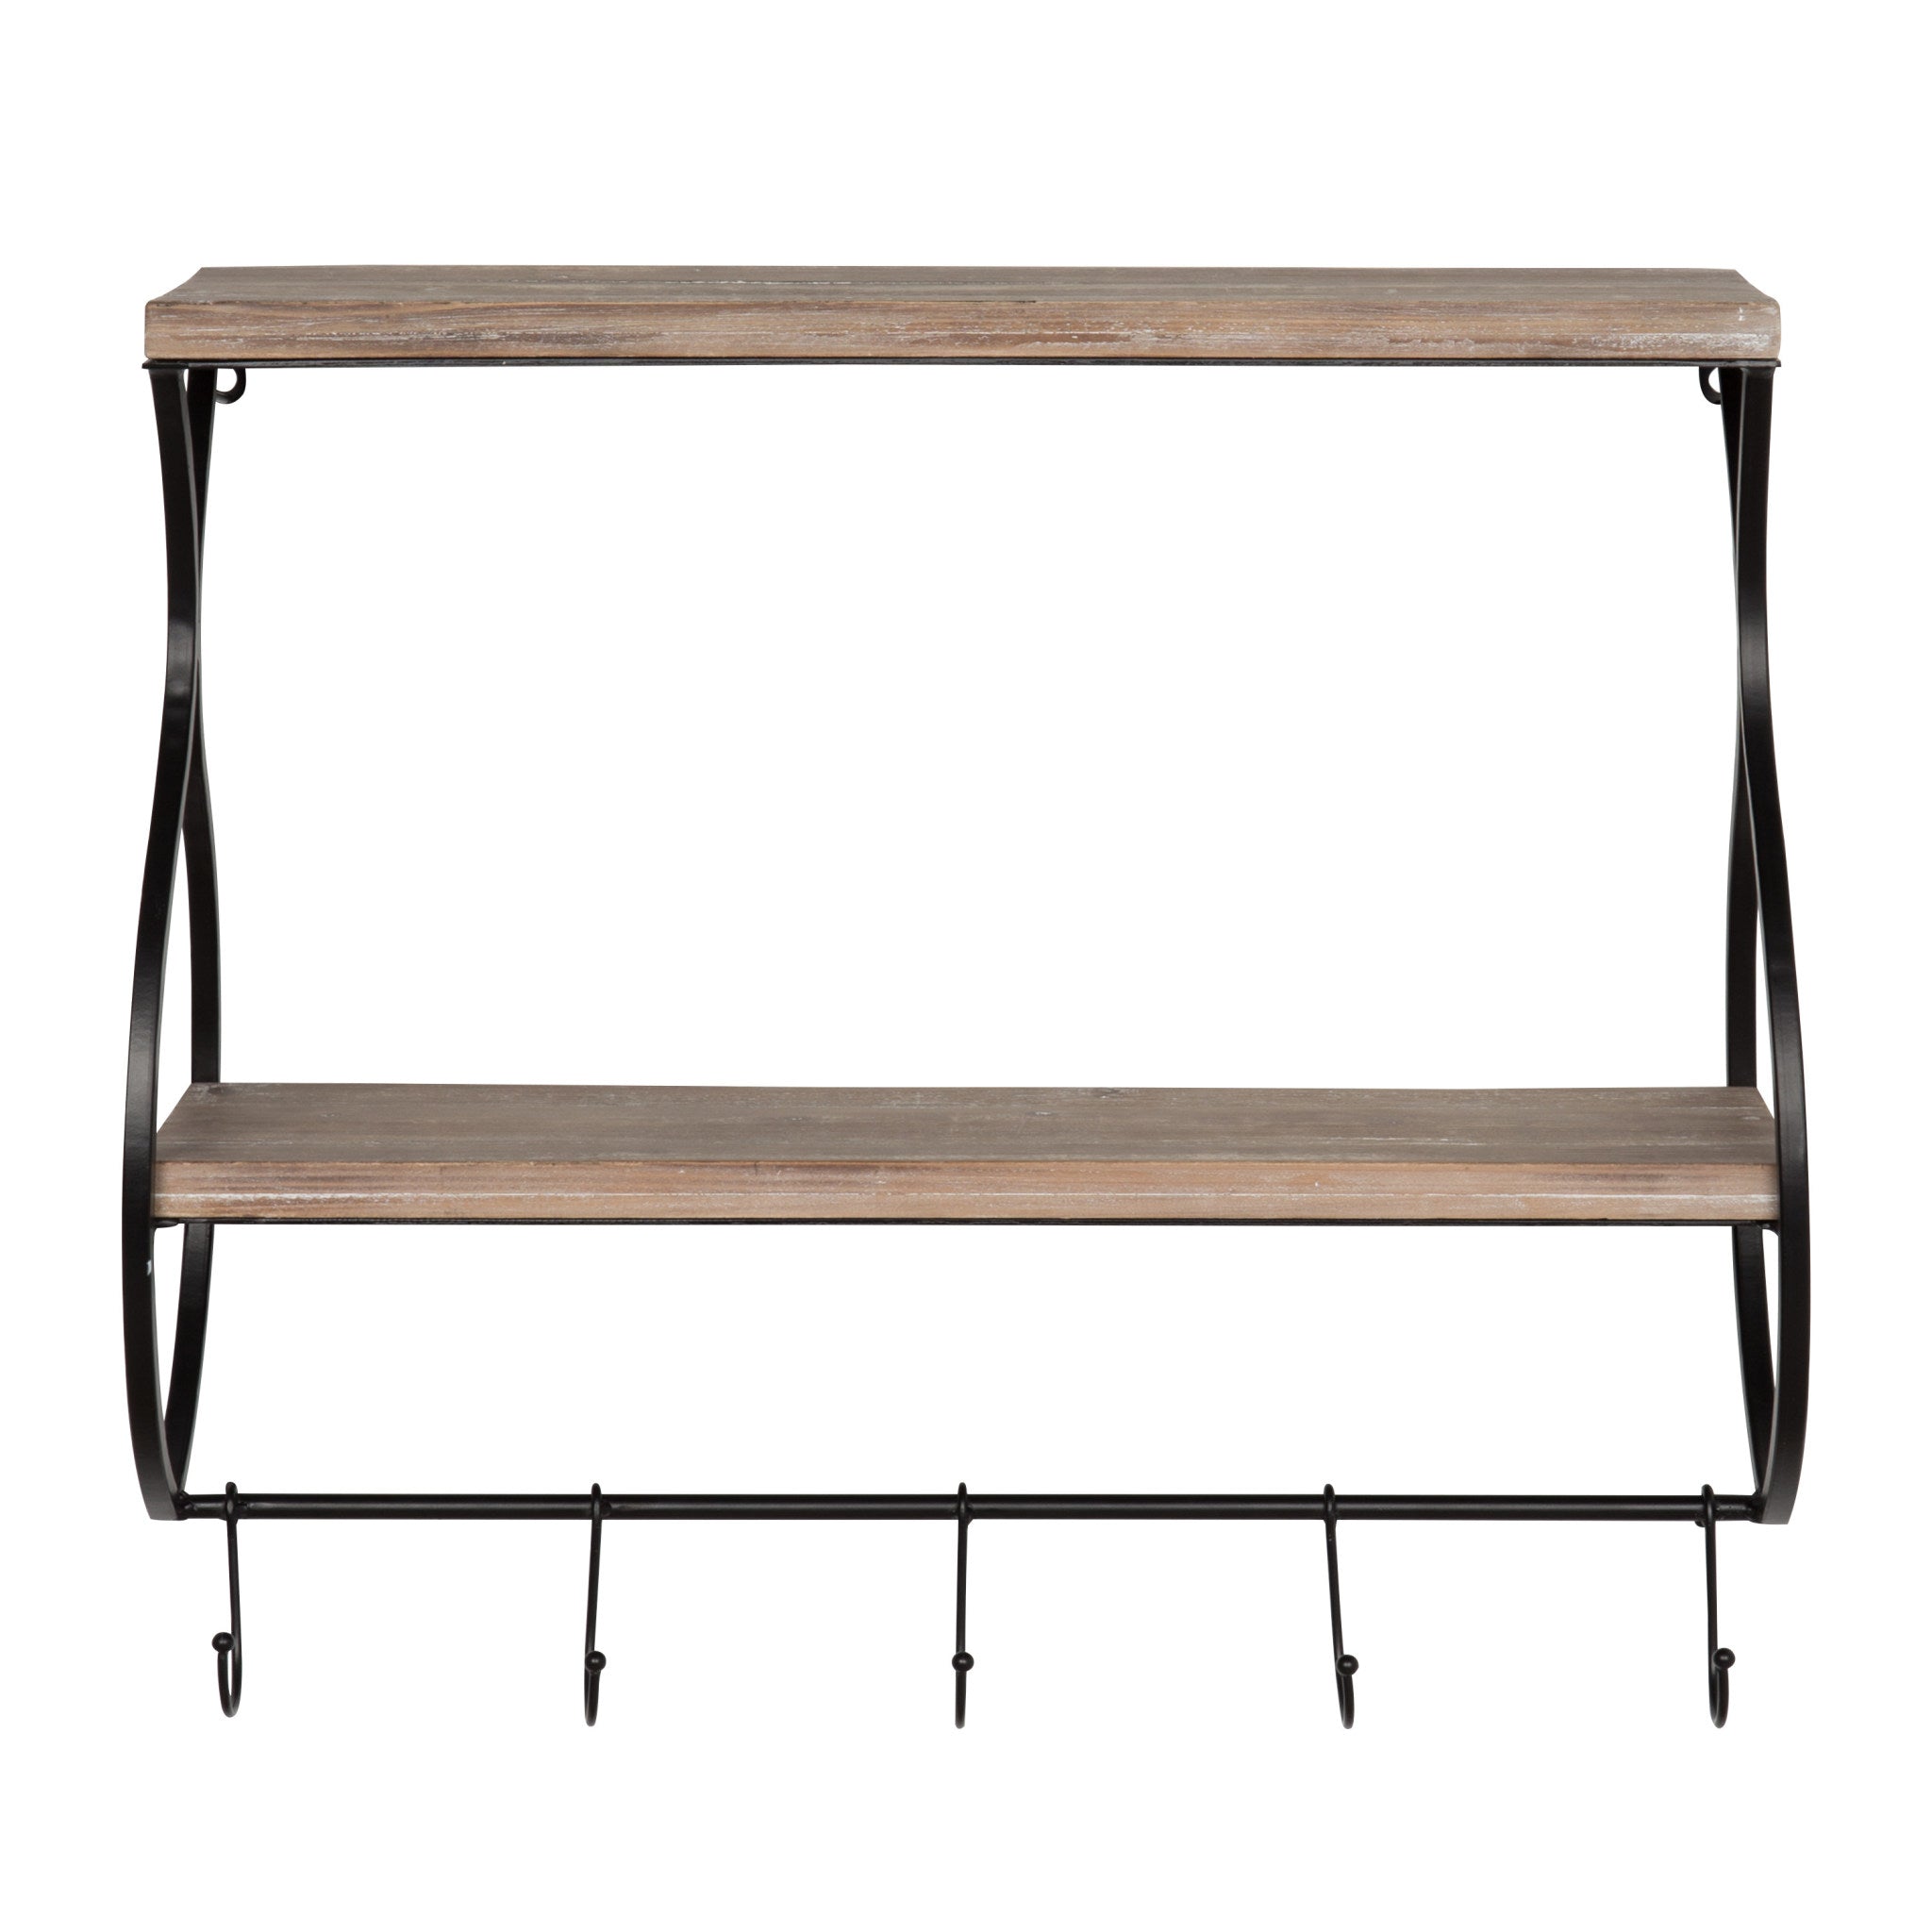 Spurling Wood and Metal Floating Wall Shelf with Hooks